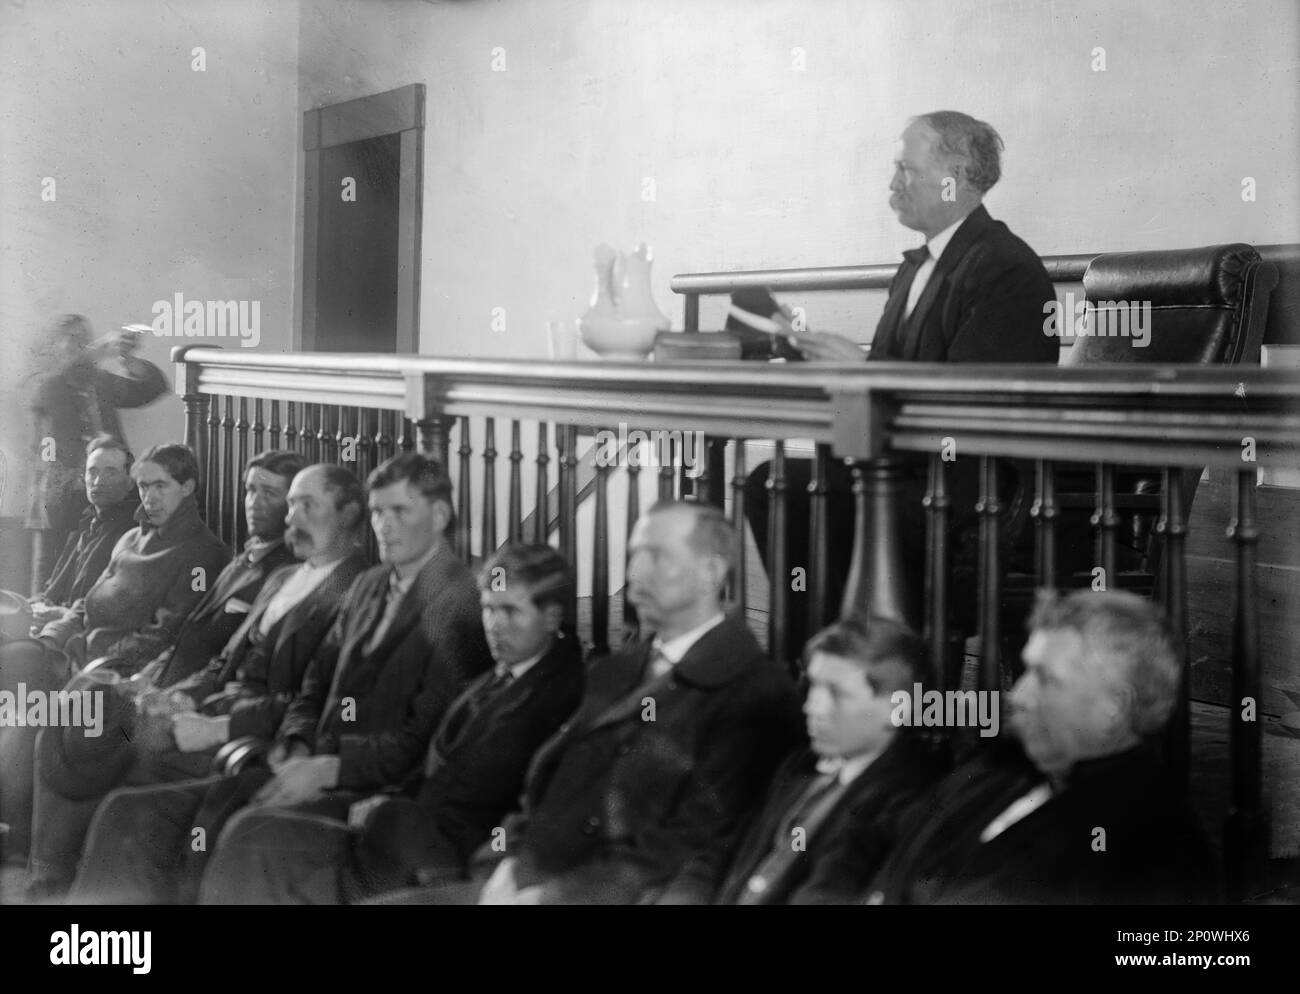 Feud - Scenes in Virginia Mountain Town at Trial After Feud, 1912. Judge Walter R. Staples in court; possibly a reenactment of the shooting of the first judge. Photo taken in Carroll County, Virginia, between March and May 1912. Related to second trial of Floyd Allen after he killed the judge at his first trial. Landowner Floyd Allen was convicted and executed for murder in 1913 after a courthouse shootout the previous year that left a judge, prosecutor, sheriff, and two others dead. Stock Photo